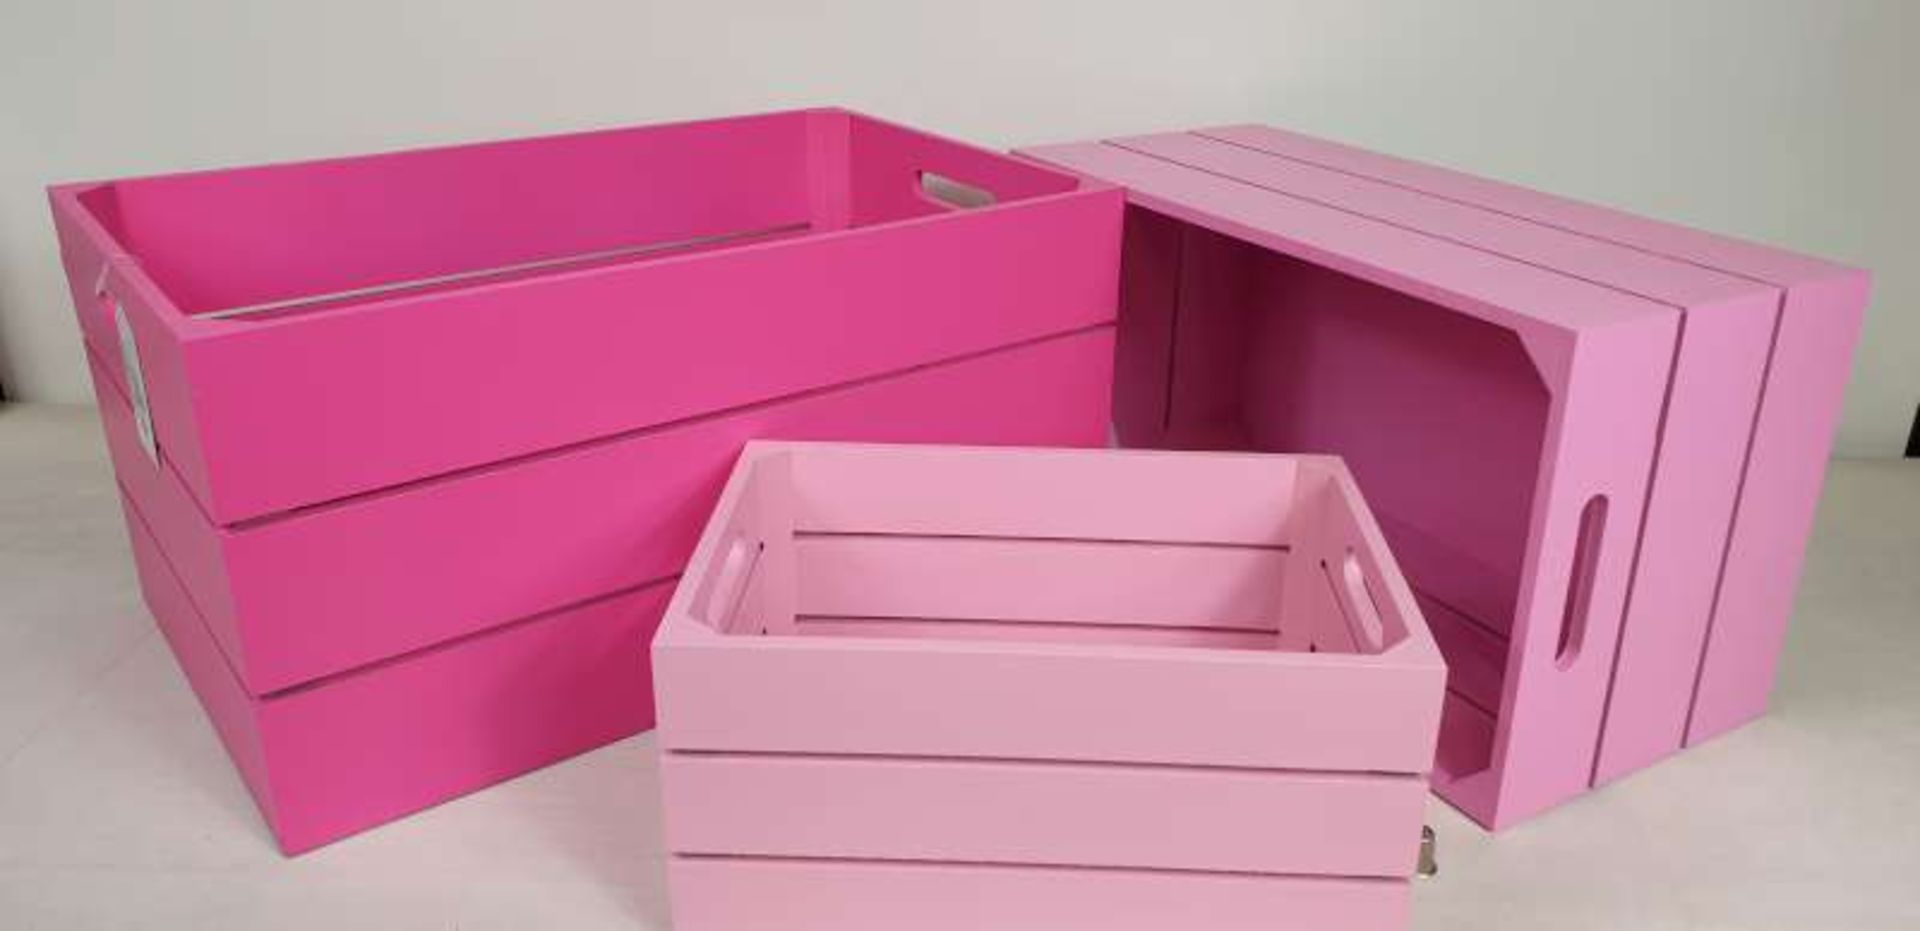 12 X NEST OF 3 PINK COLOURED WOODEN CRATES IN 12 BOXES